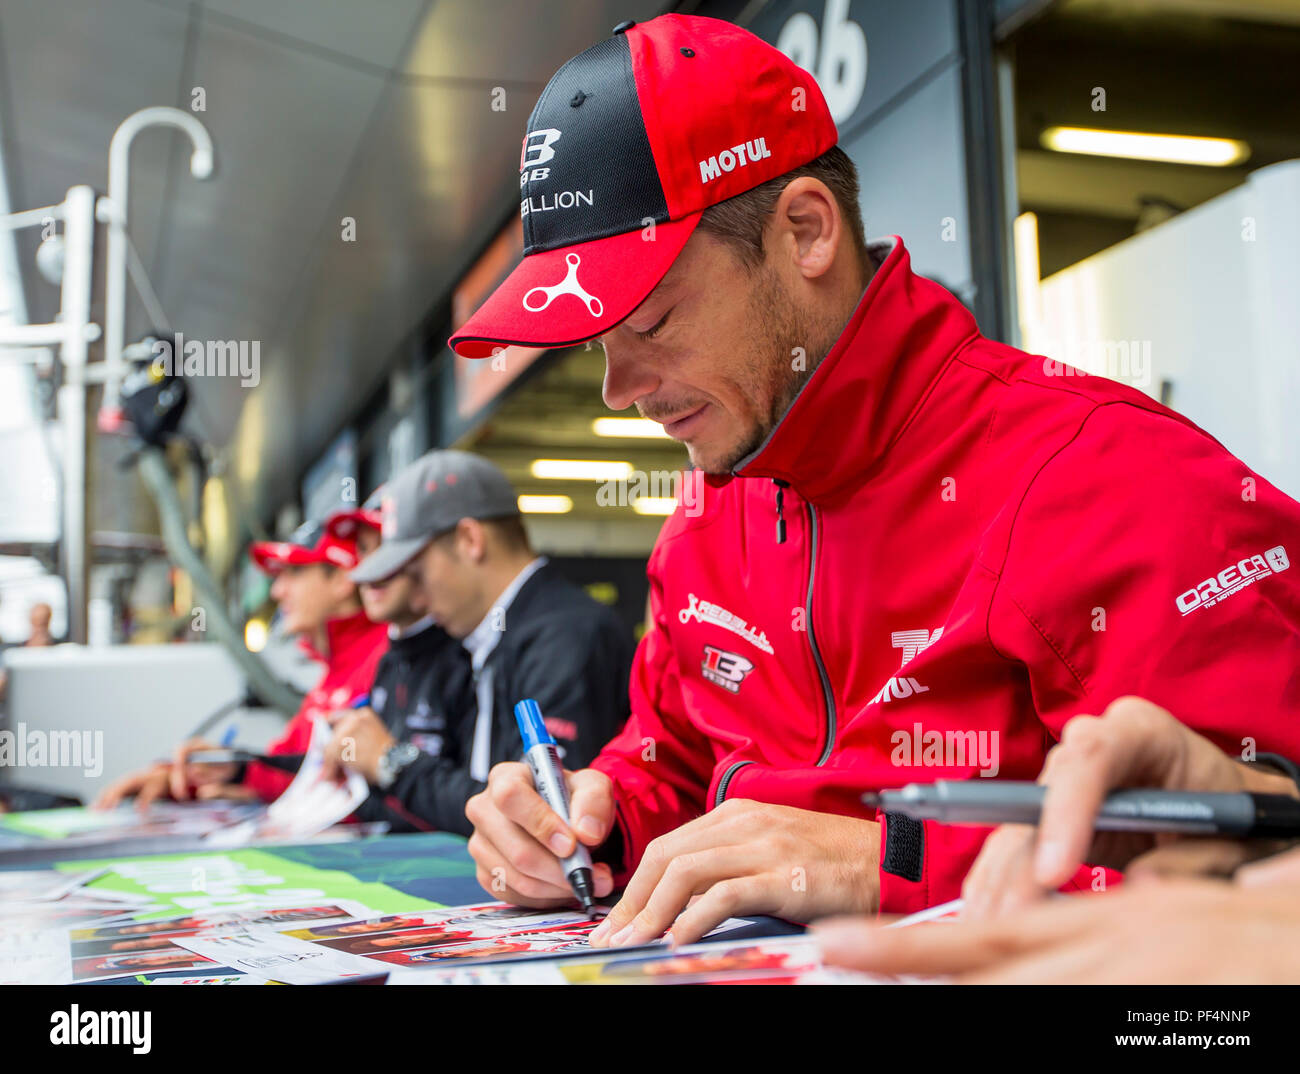 Silverstone Circuit, UK. 19th Aug, 2018. FIA World Endurance Championship; Andre Lotterer (DEU) of the Rebellion R13 Gibson LMP1 racing car from Rebellion Racing (CHE) signing spectator autographs outside the pit garage during Round 3 of the FIA World Endurance Championship at Silverstone Credit: Action Plus Sports/Alamy Live News Stock Photo